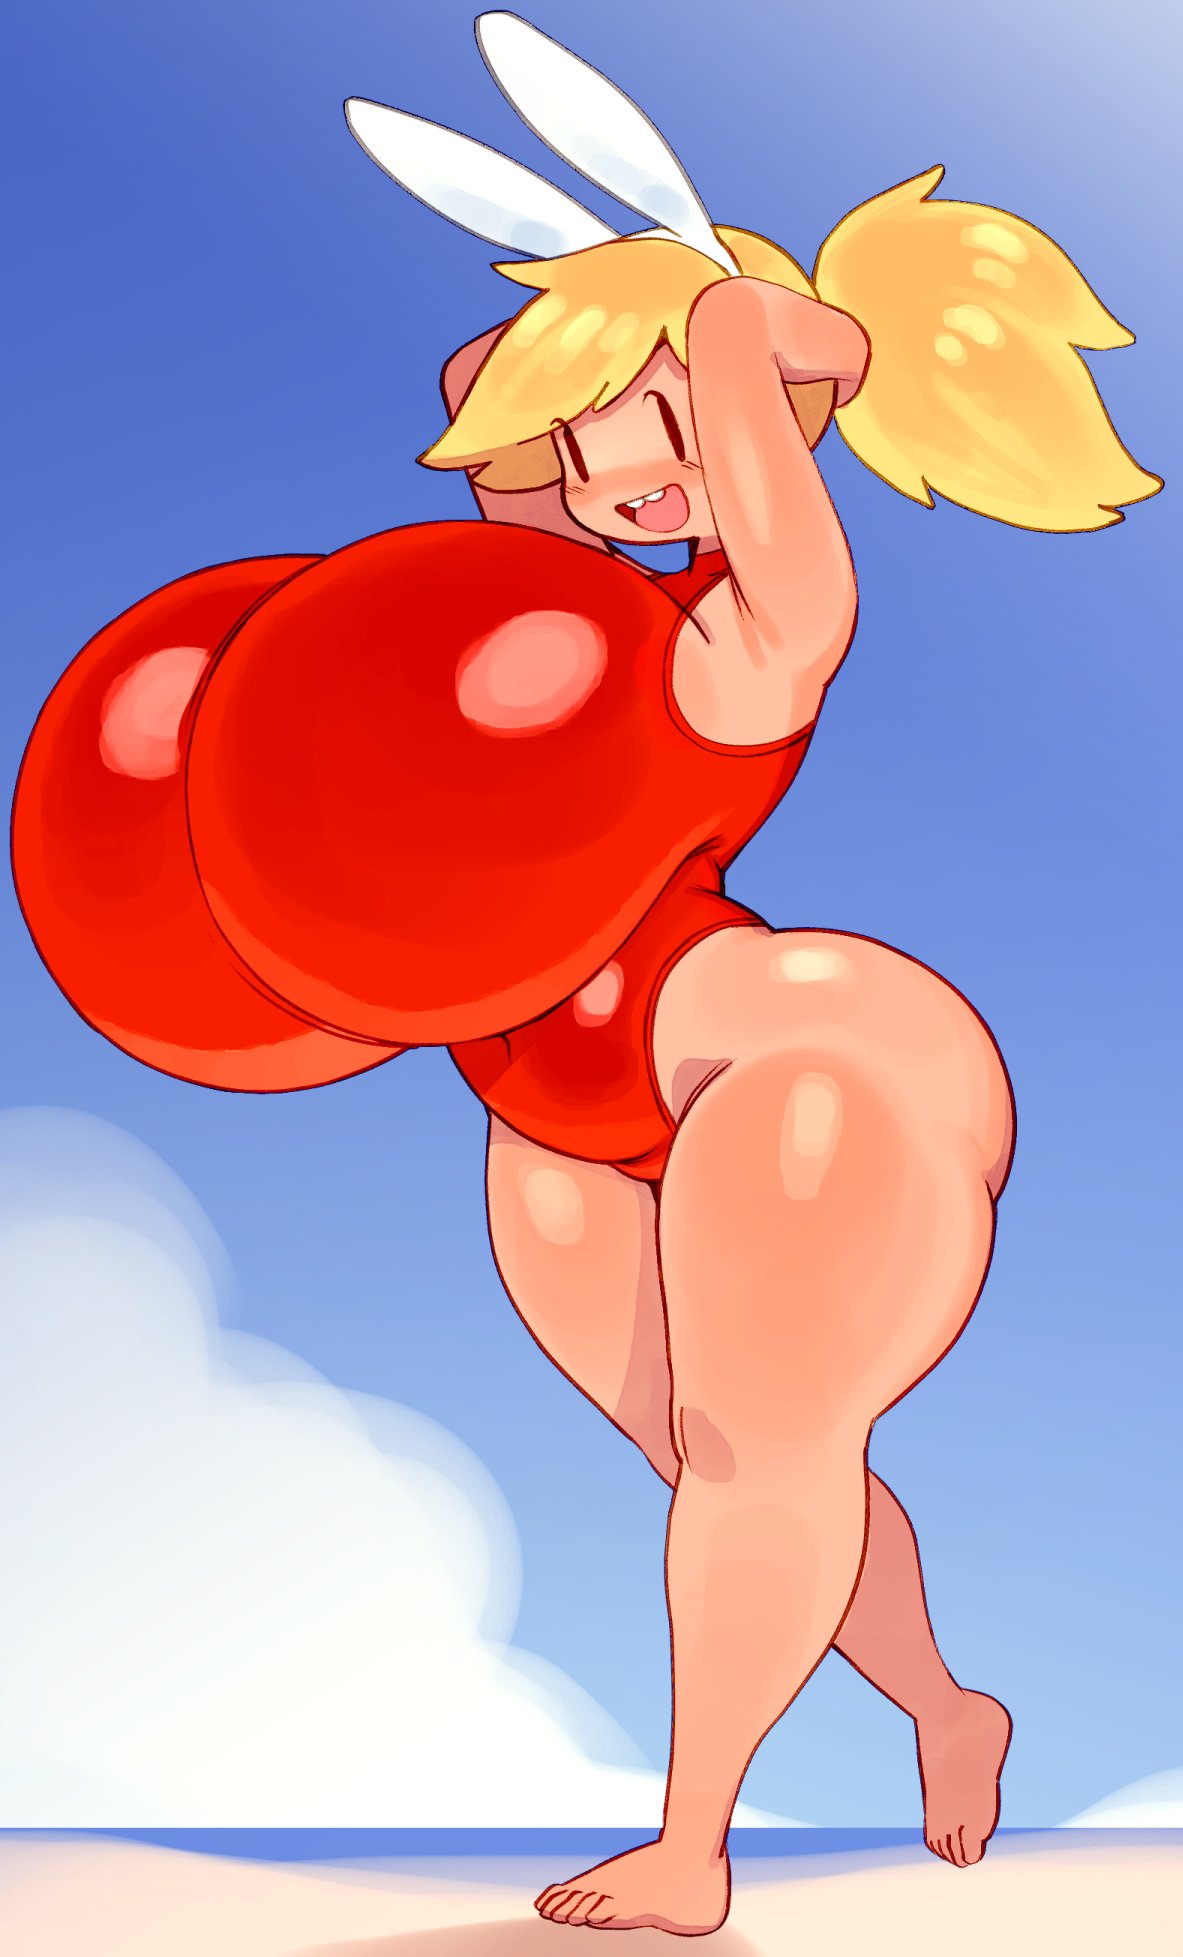 adventure_time angstrom big_breasts big_breasts blonde_female blonde_hair breasts fionna_and_cake fionna_the_human_girl giant_breasts gigantic_breasts huge_breasts massive_breasts swimsuit